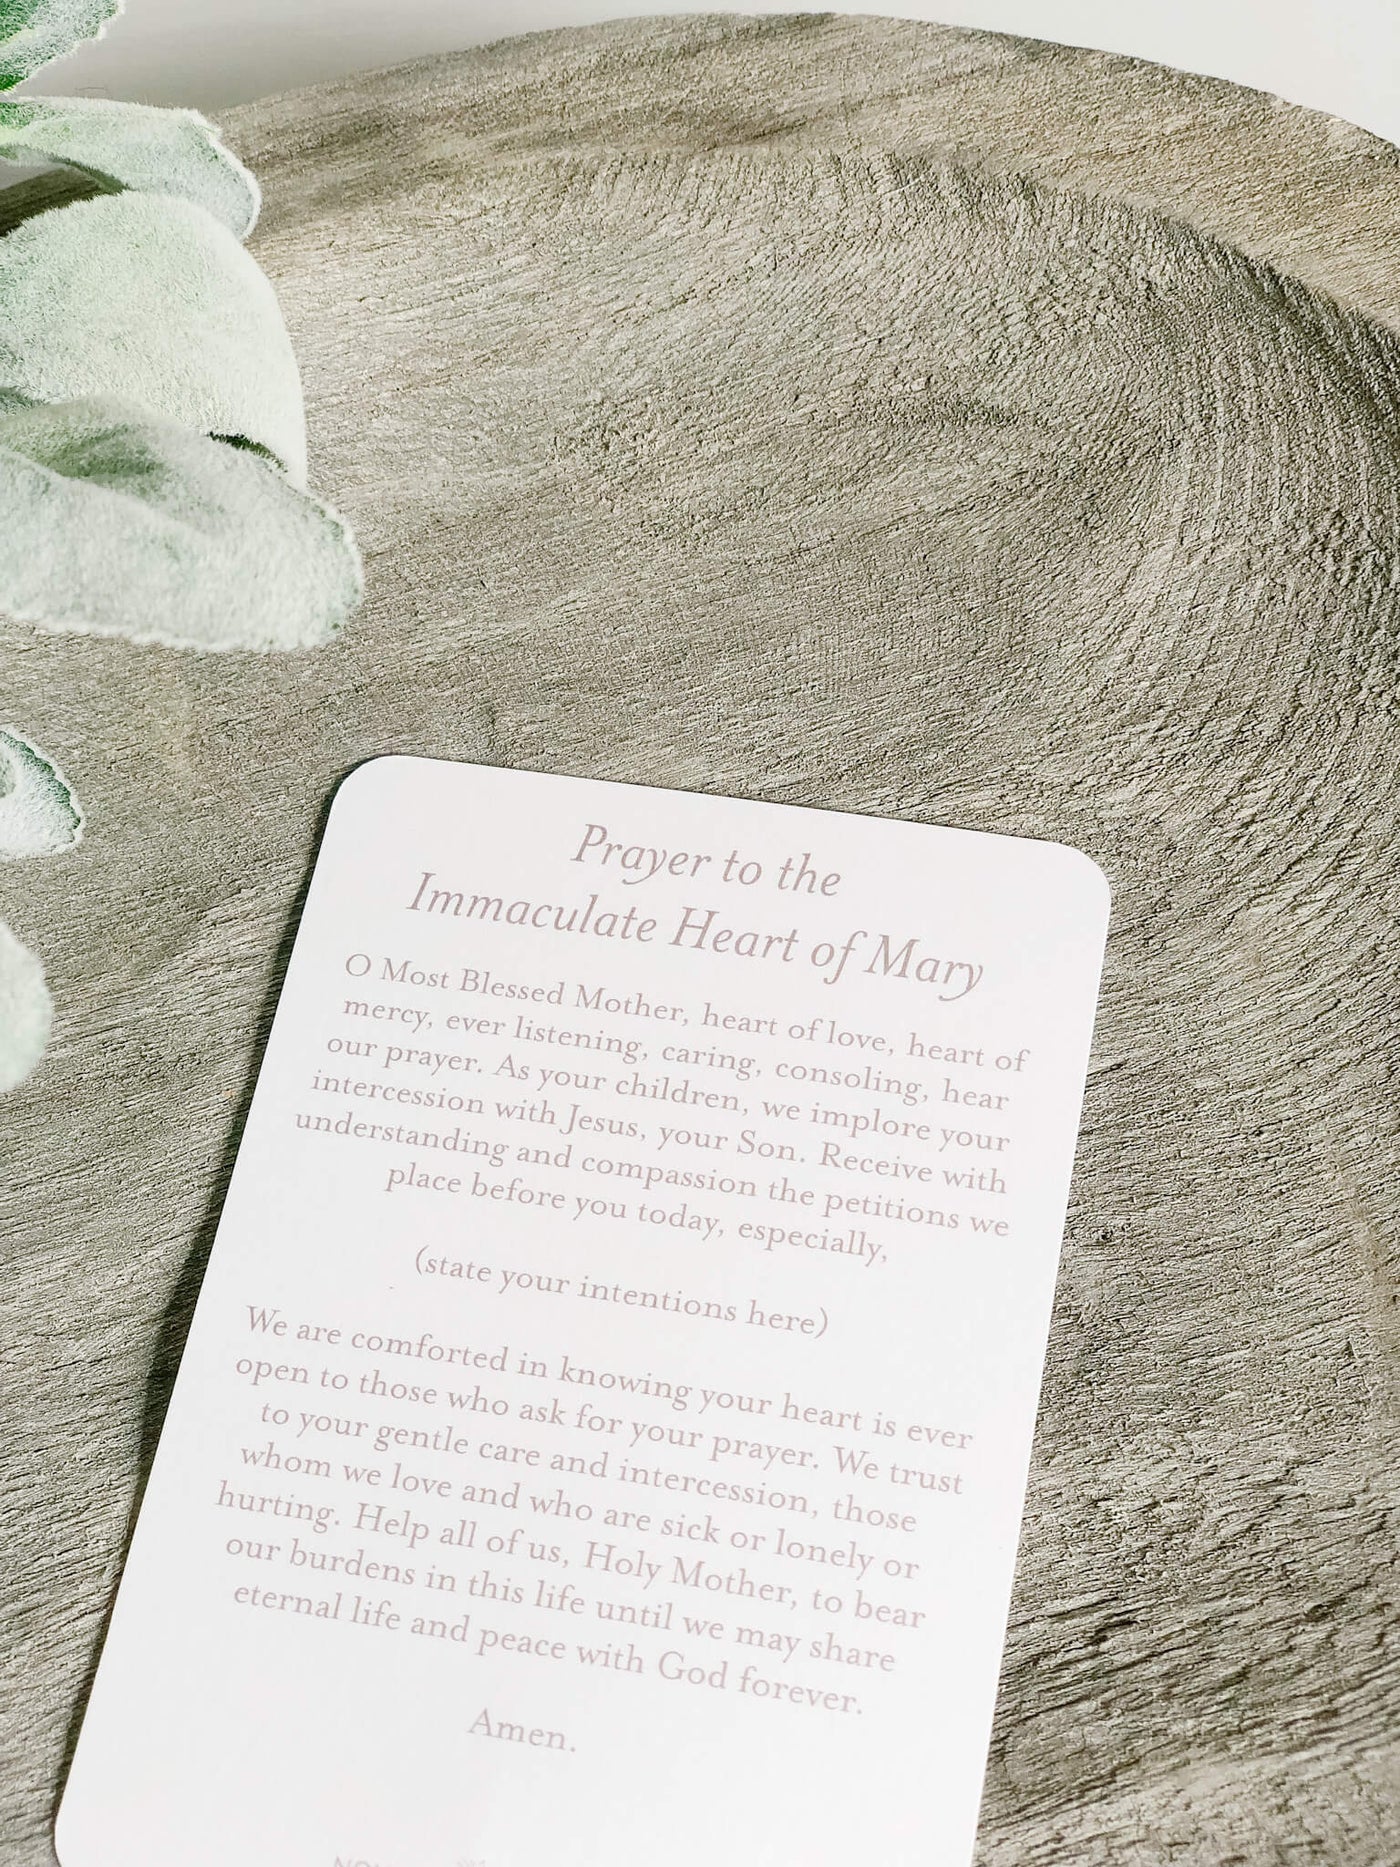 Immaculate Heart of Mary - Prayer Card